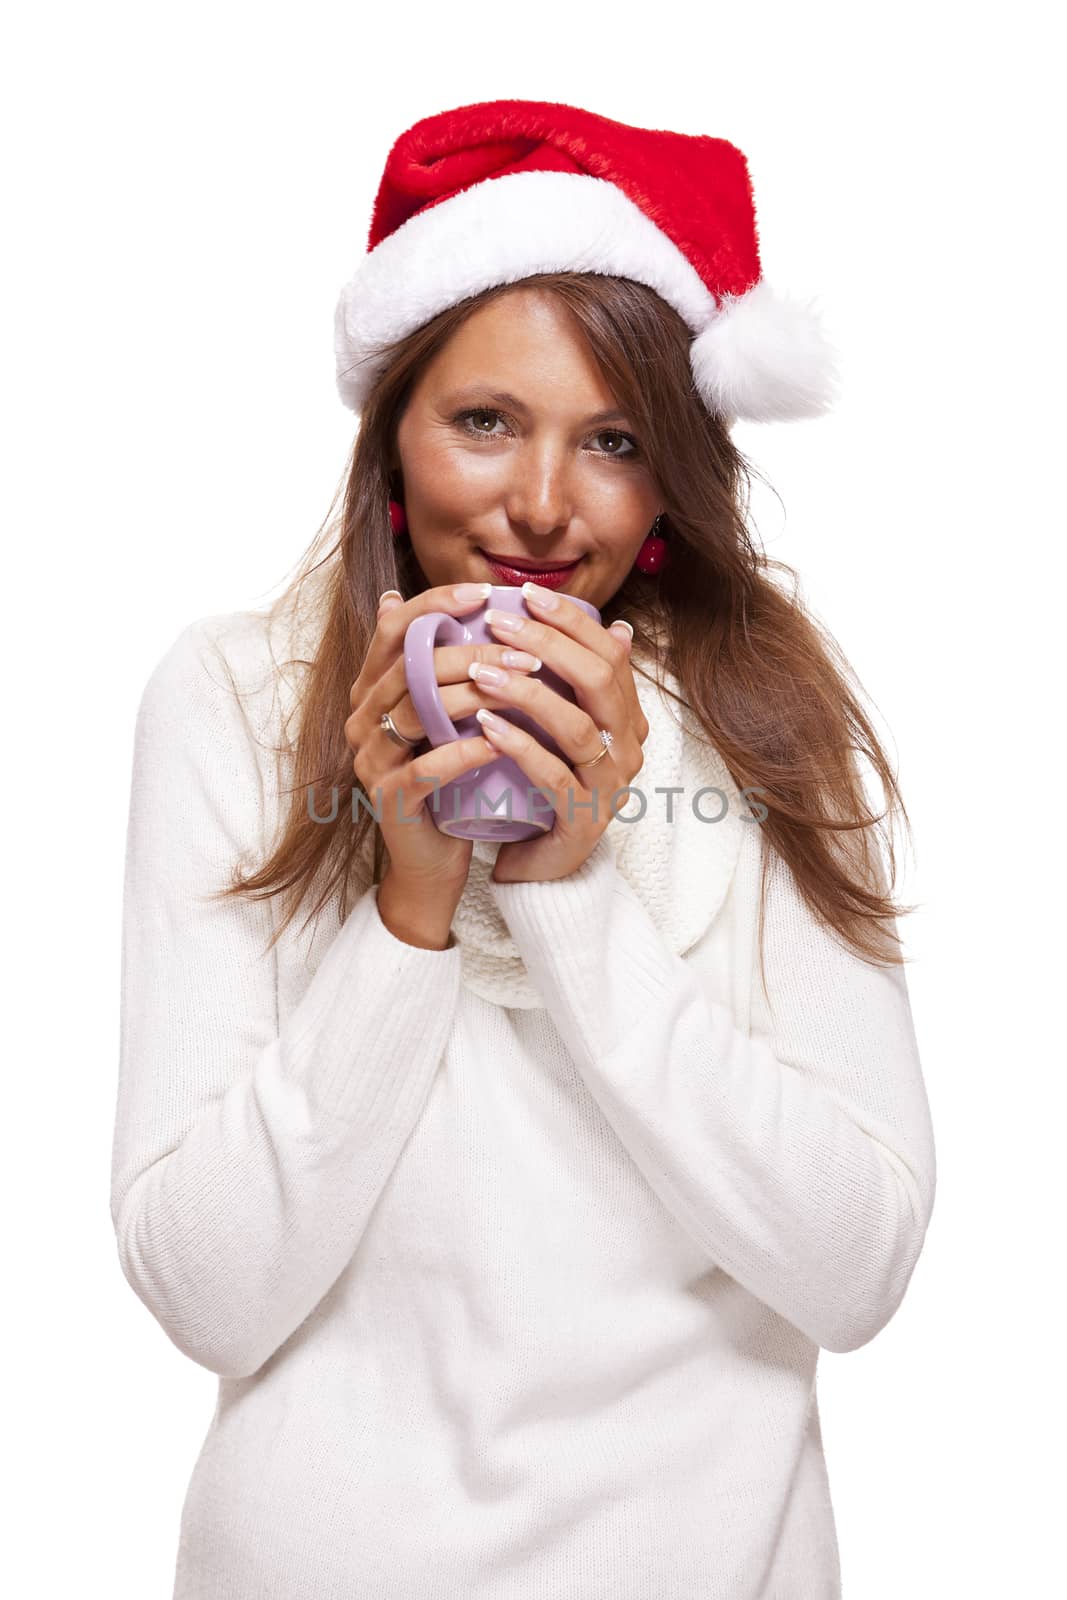 Cold young woman in a Santa hat sipping coffee tea by juniart